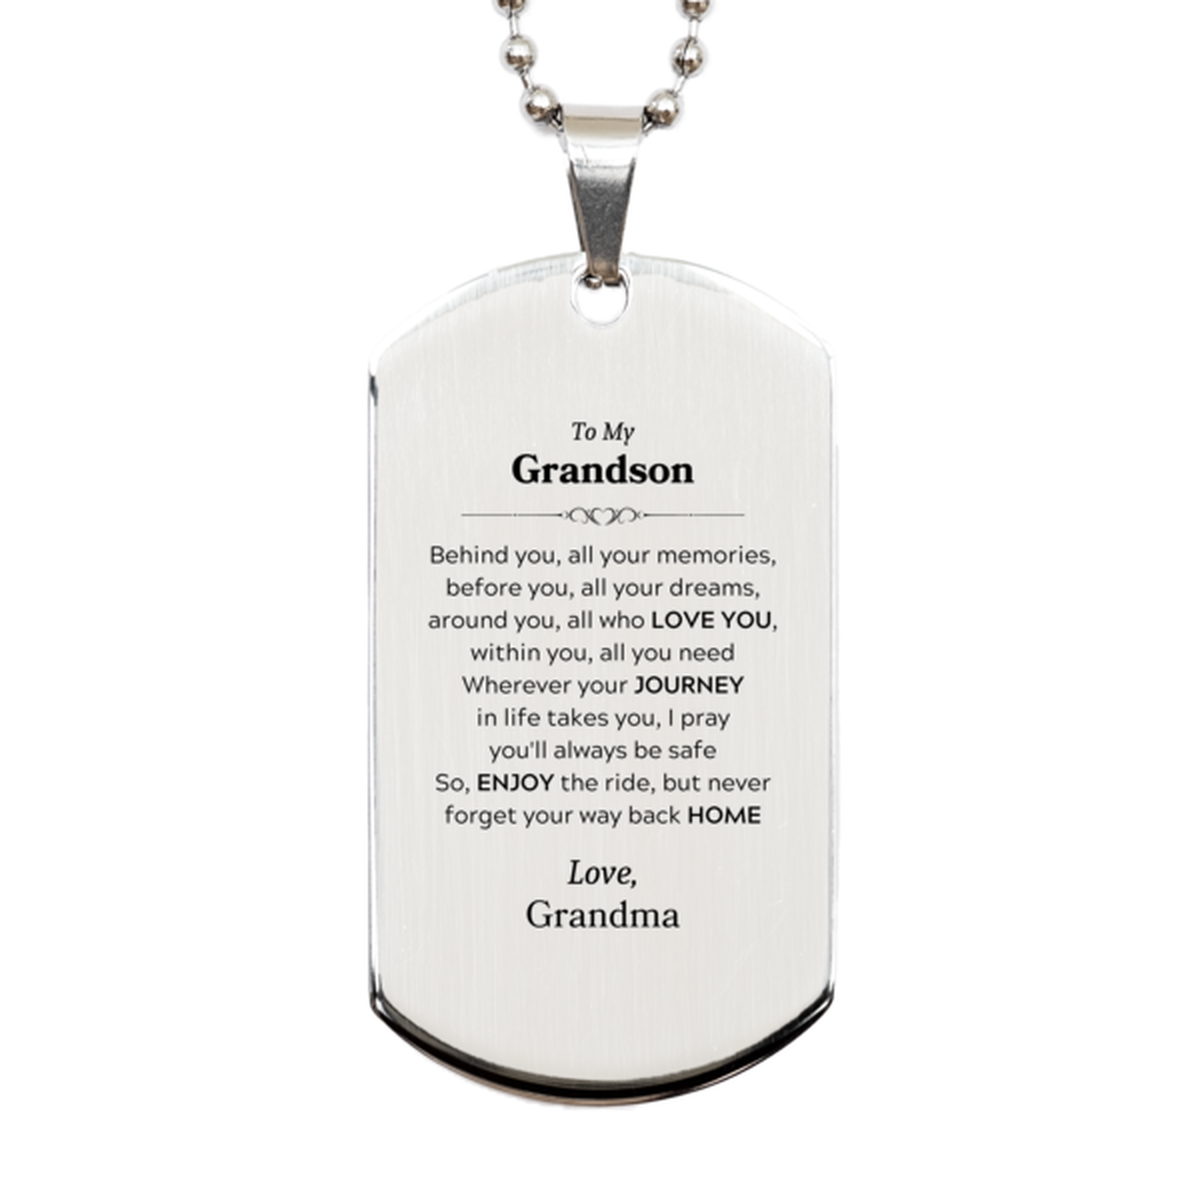 To My Grandson Graduation Gifts from Grandma, Grandson Silver Dog Tag Christmas Birthday Gifts for Grandson Behind you, all your memories, before you, all your dreams. Love, Grandma